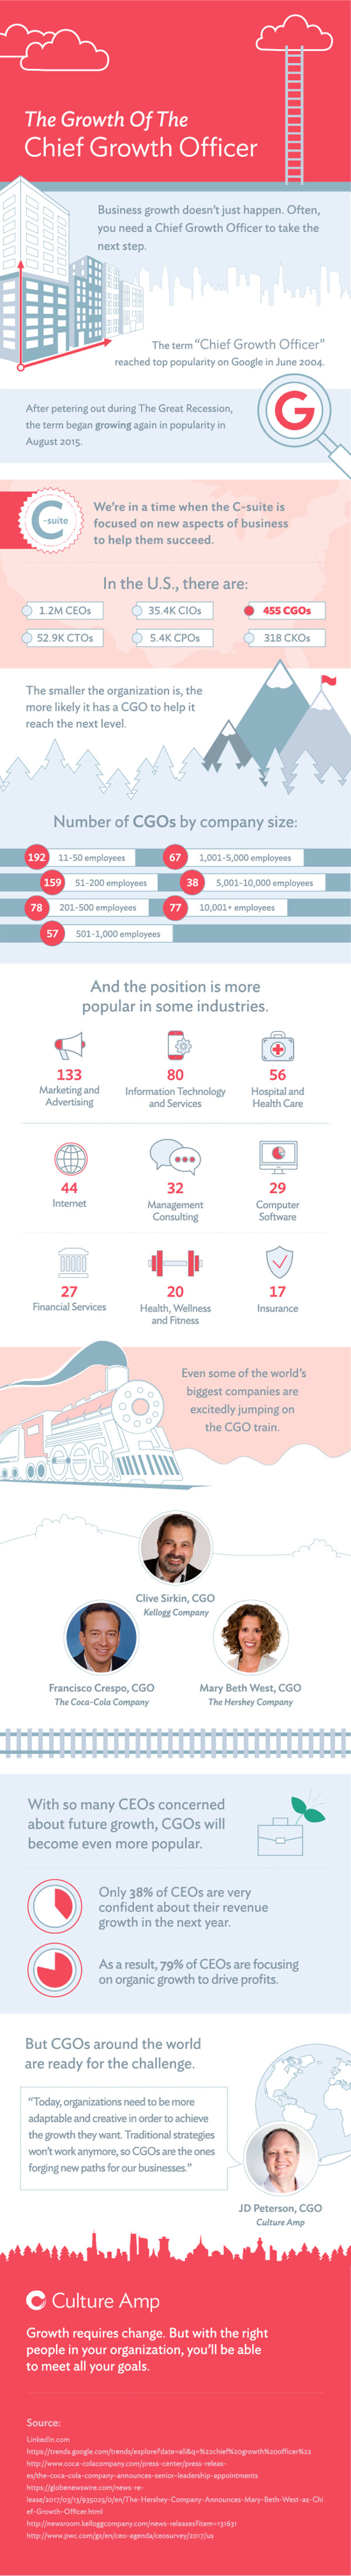 The Growth of the Chief Growth Officer Infographic